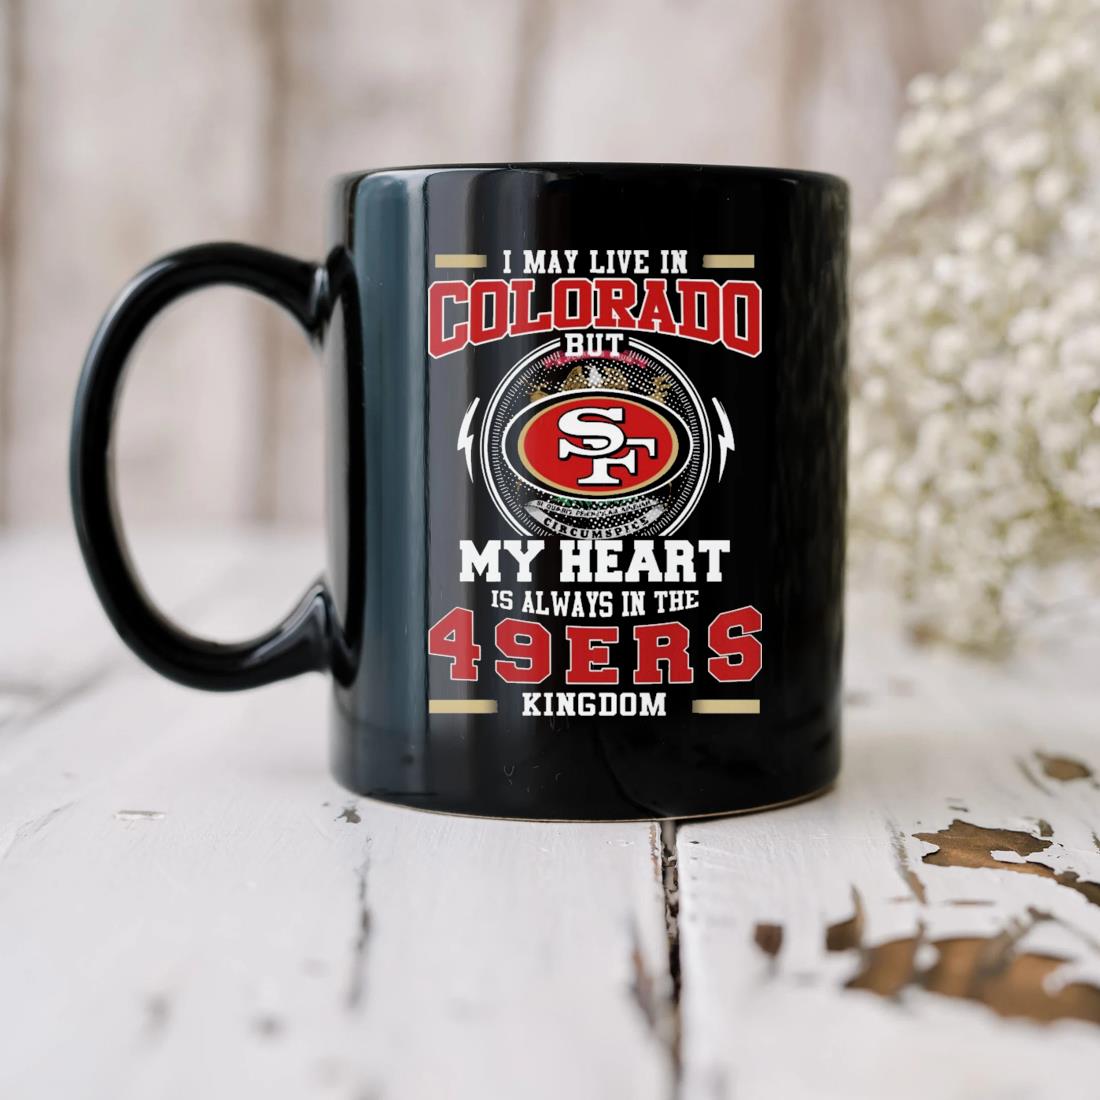 I May Live In Colorado But My Heart Is Always In The 49ers Kingdom Mug